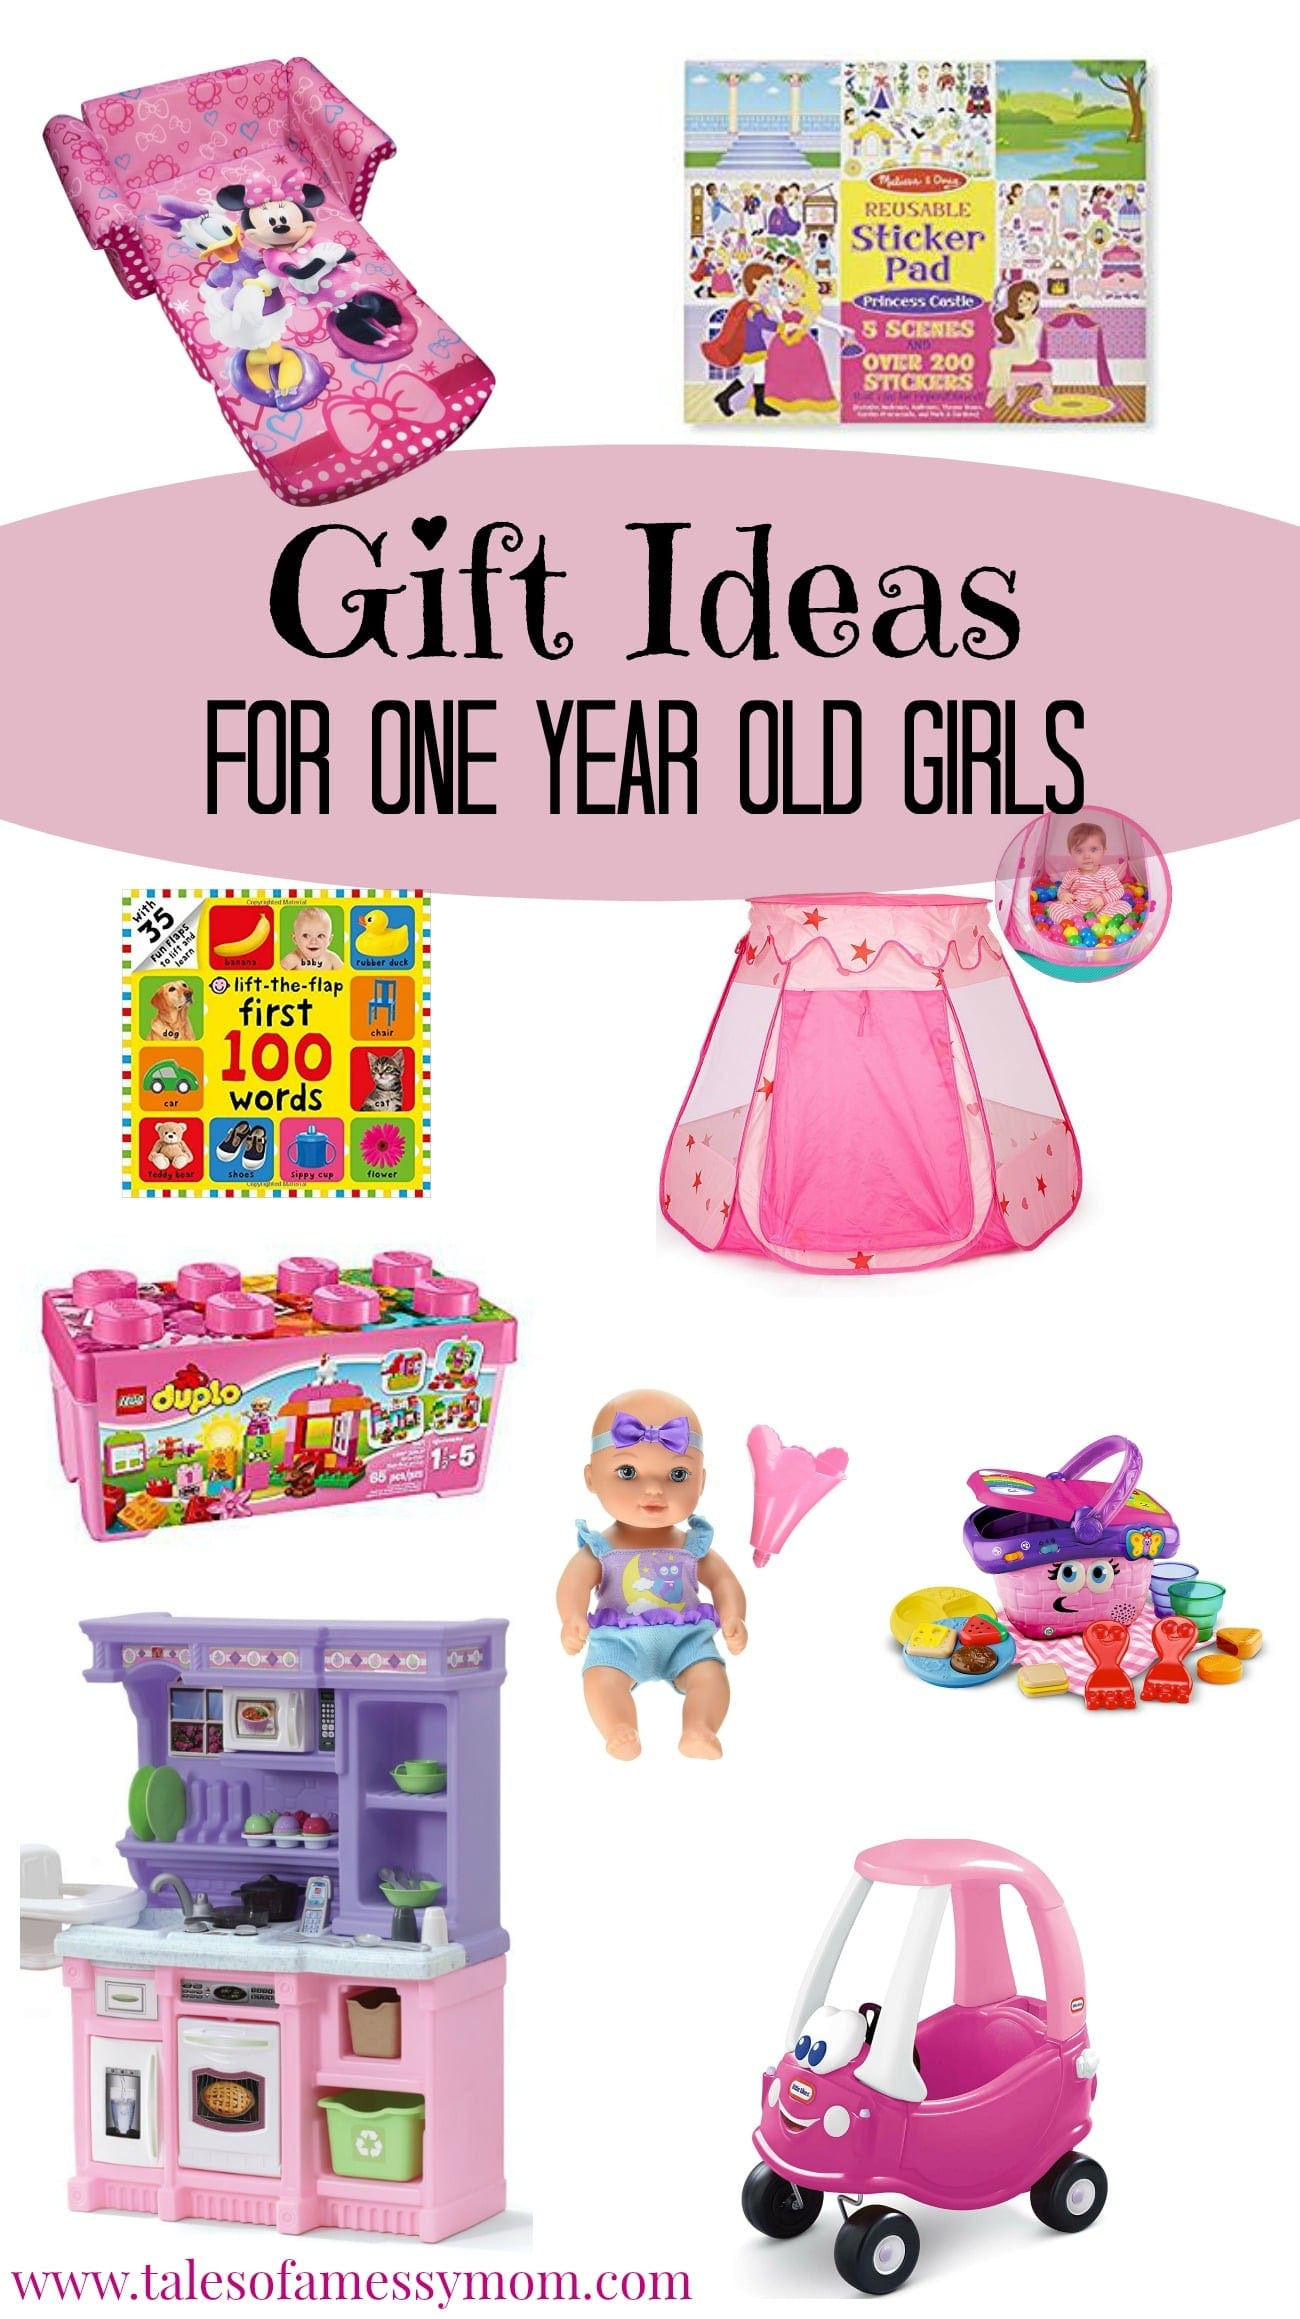 Girls Gift Ideas
 Gift Ideas for e Year Old Girls Tales of a Messy Mom